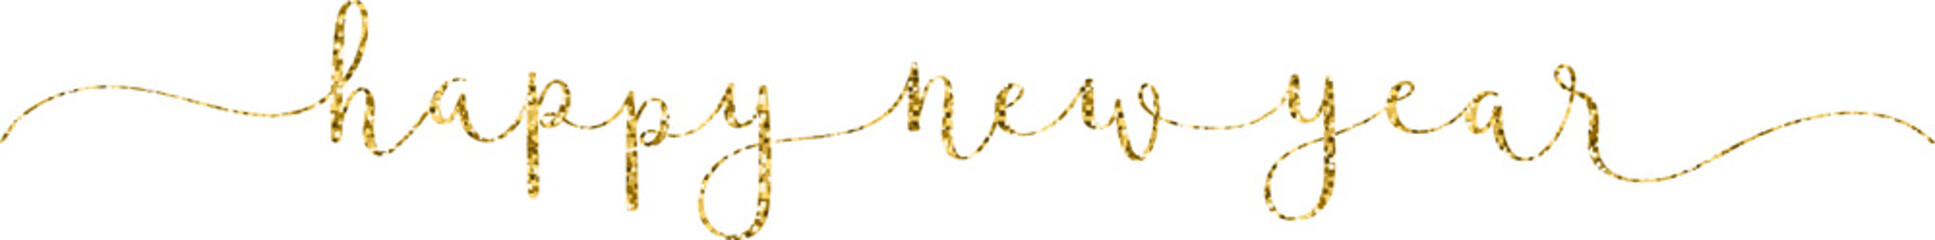 Sticker - HAPPY NEW YEAR gold glitter brush calligraphy banner on transparent background